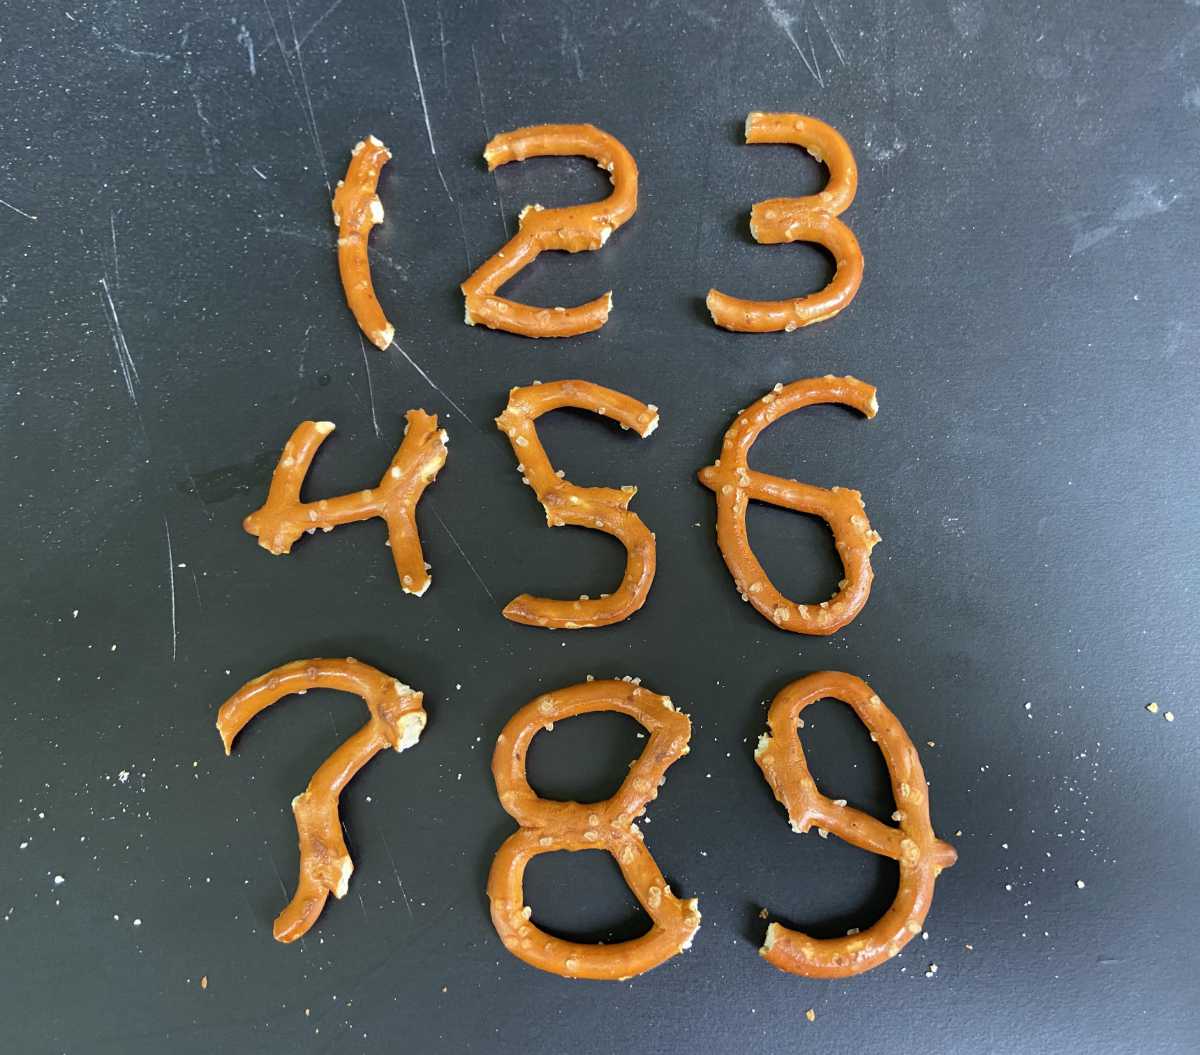 Numbers I made out of pretzels